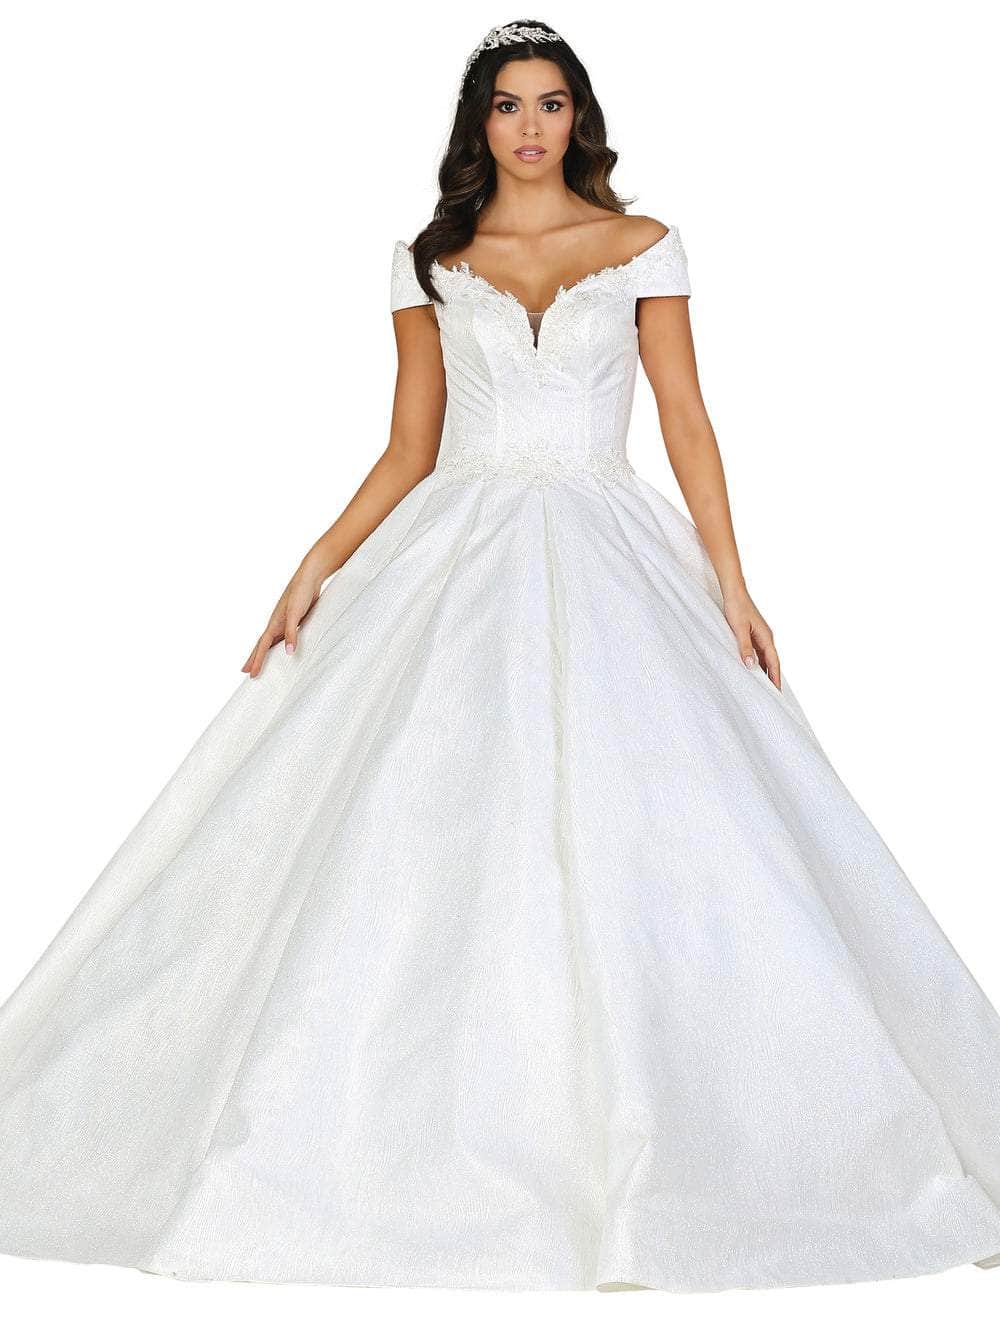 Dancing Queen 0107 - Embroidered Off-Shoulder Ballgown Special Occasion Dresses